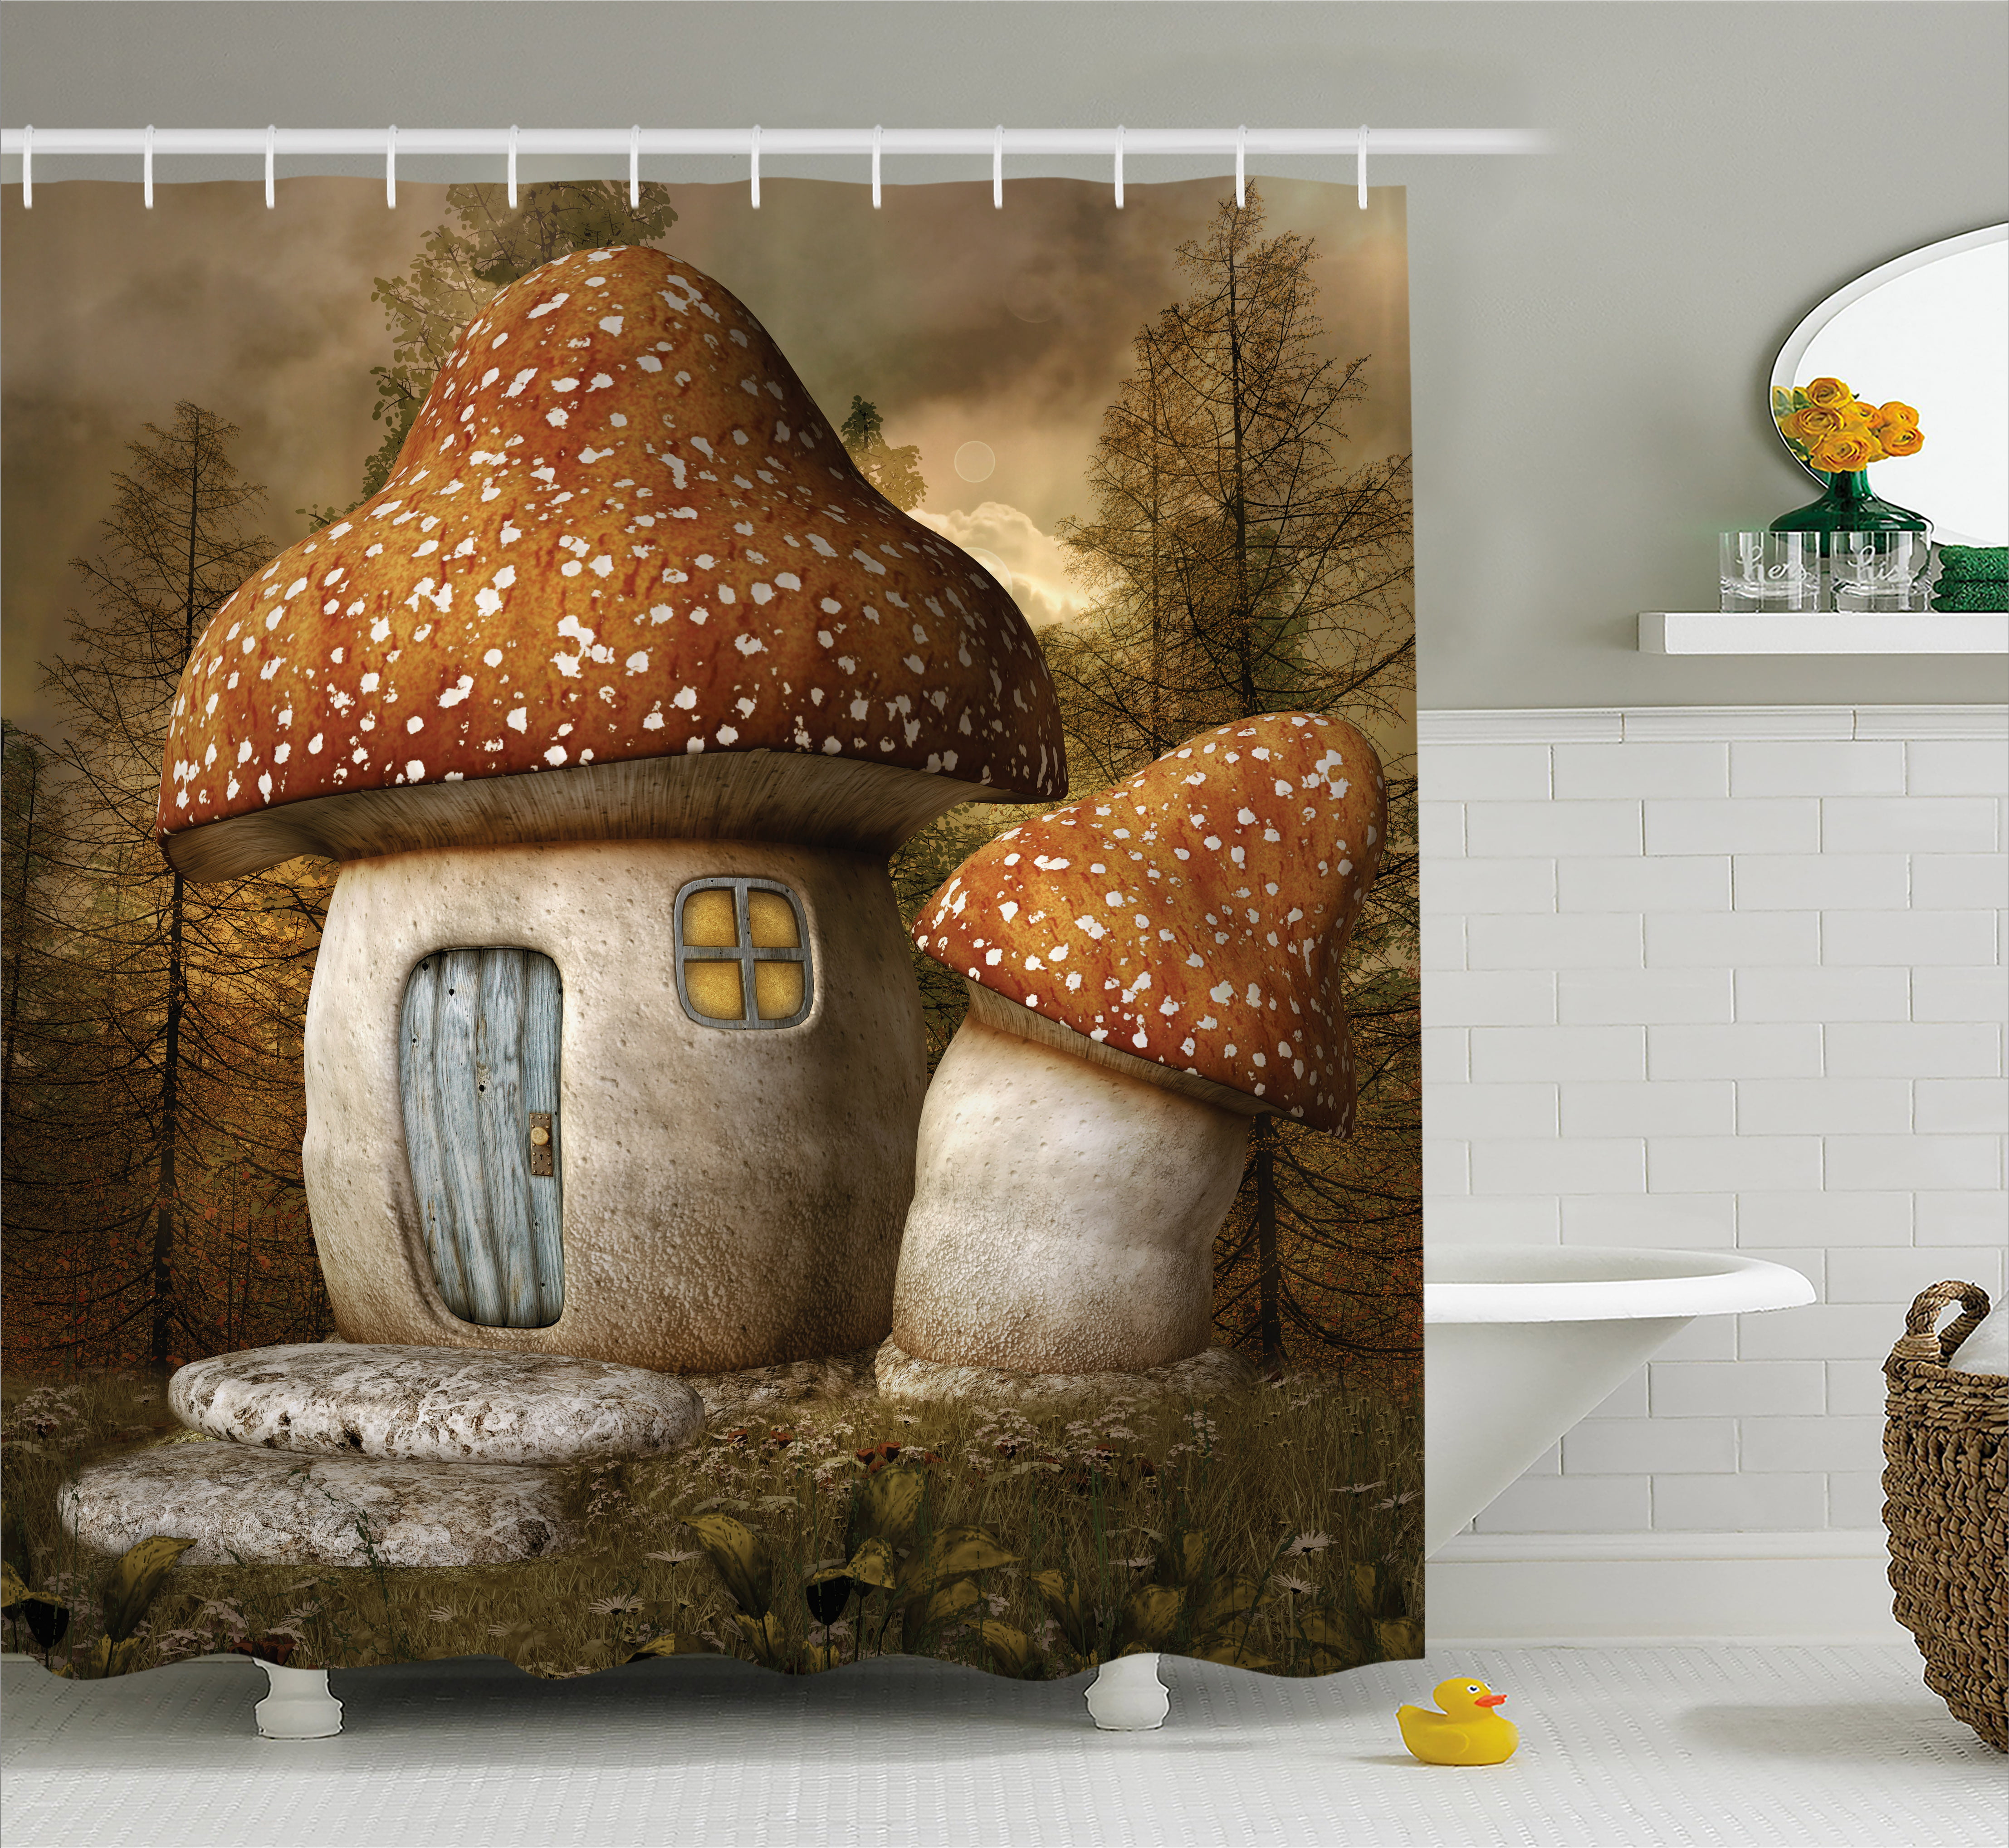 Fairy Tale Shower Curtain, Spotted Mushroom House Enchanted Forest with ...